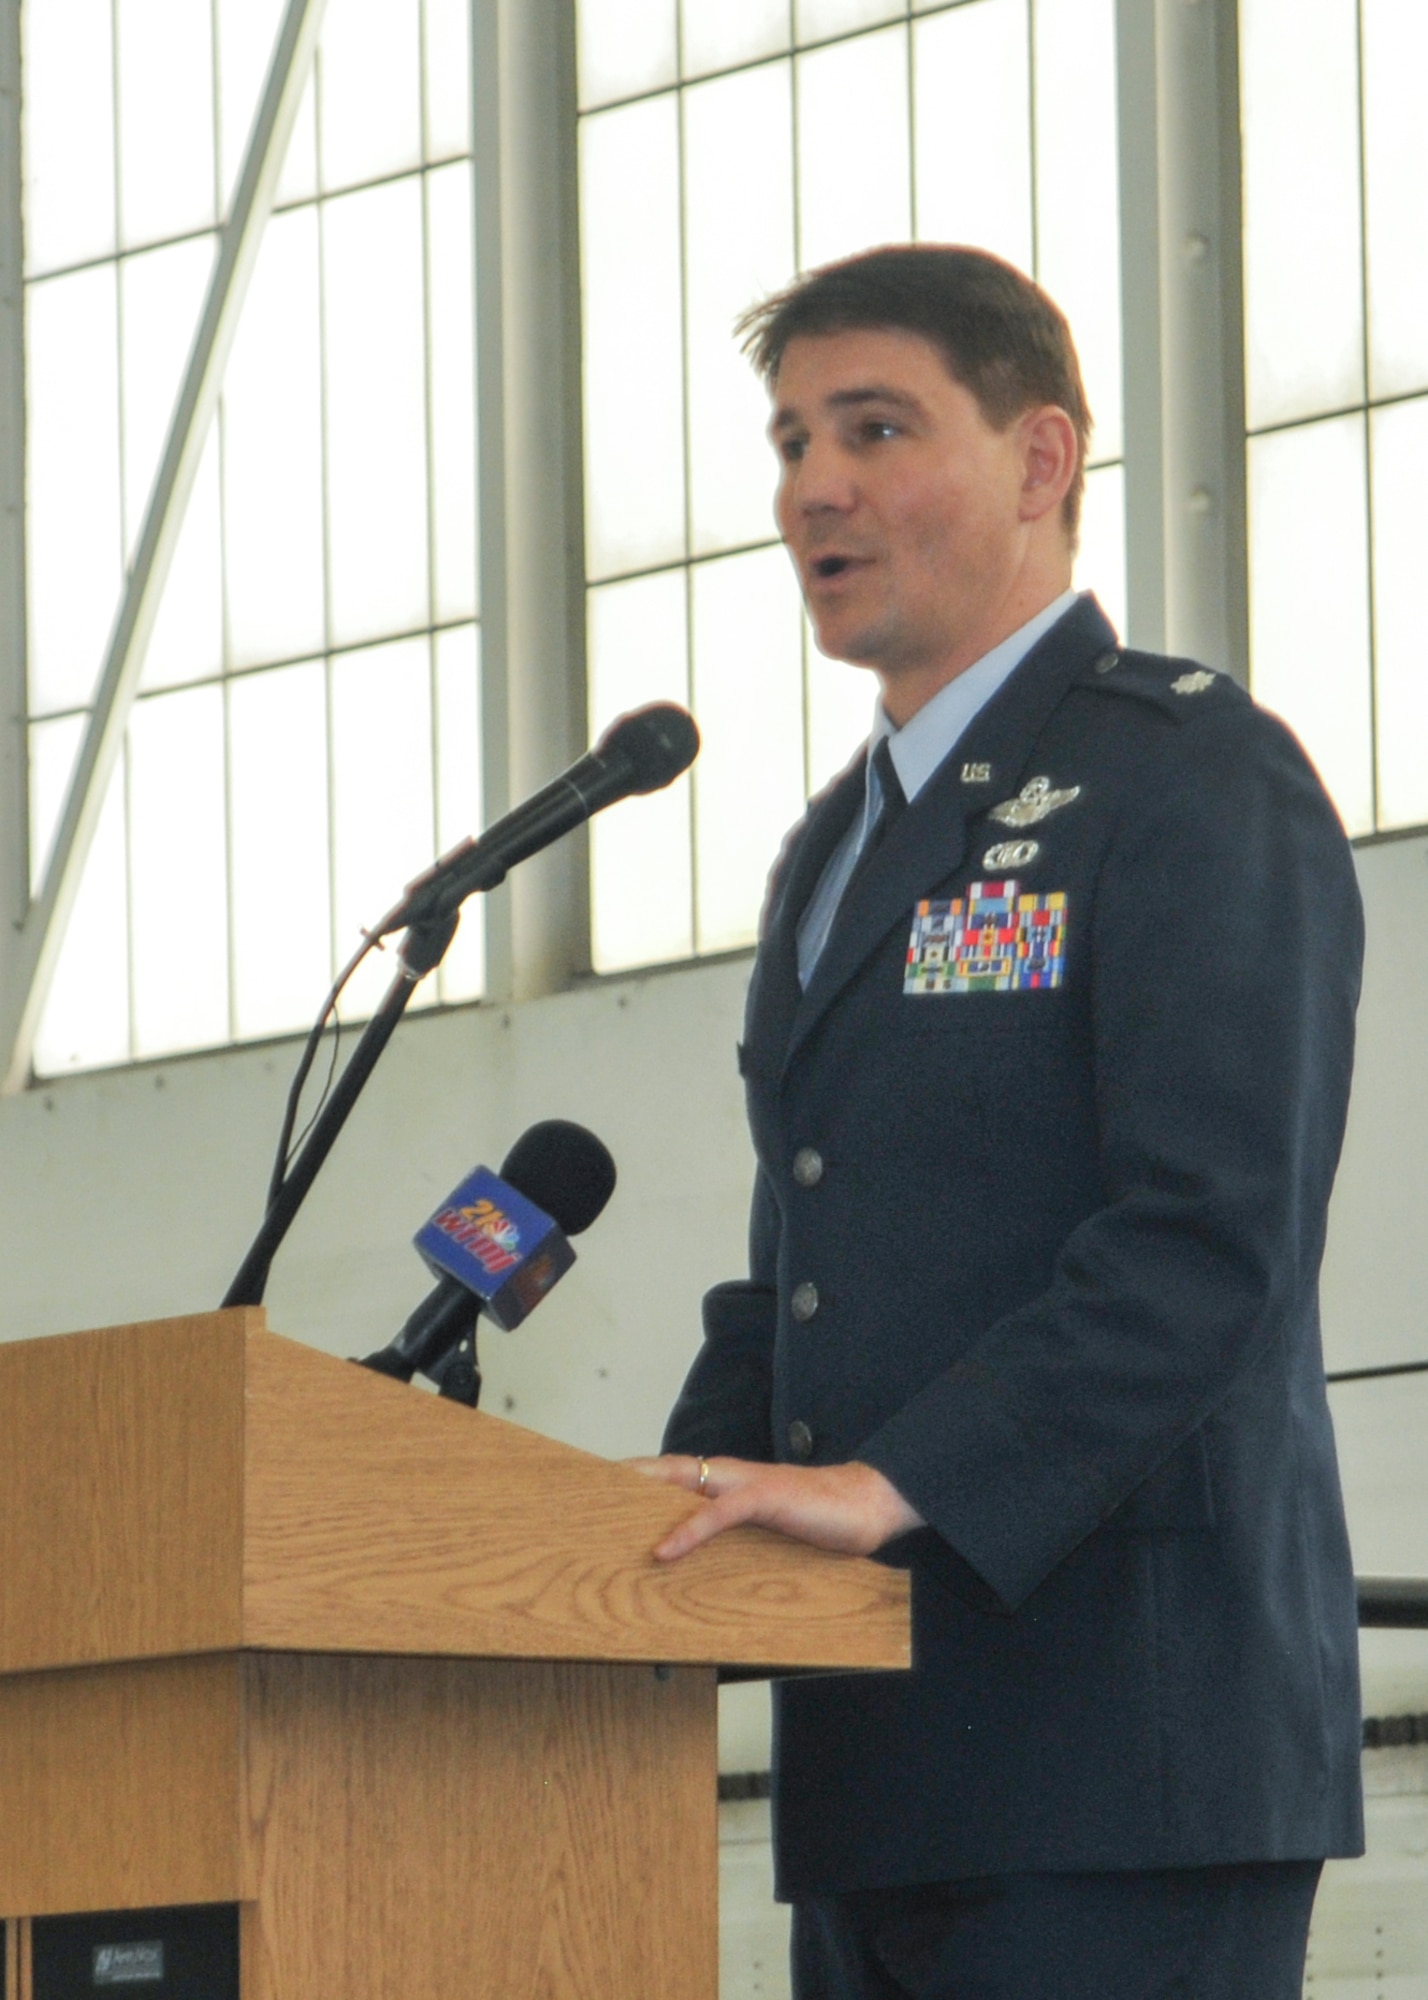 Lt. Col. John Boccieri, commander of the 773rd Airlift Squadron addresses the audience during a deactivation ceremony for the 773rd Airlift Squadron here, April 6, 2014. The squadron, which was activated as a unit of the 910th Airlift Wing in 1995, was officially deactivated on March 31. The deactivation resulted from Air Force structure changes that reduced the 910th’s C-130 aircraft fleet to eight Primary Assigned Aircraft and on Back-up Inventory Aircraft. U.S. Air Force photo/Tech. Sgt. Rick Lisum.